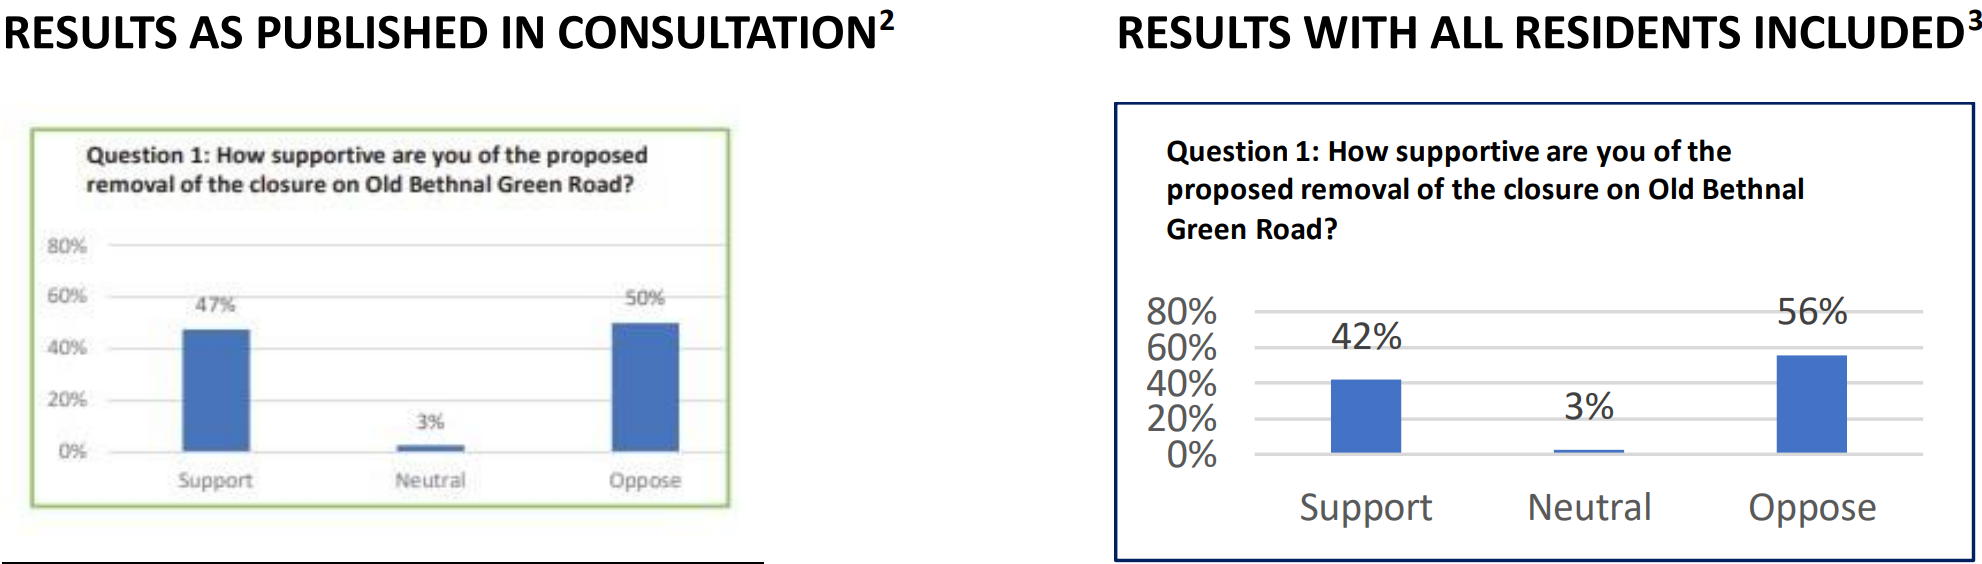 Screenshot of 2022 responses to consultation about Old Bethnal Green Road layouts, according to the council's report (left) and after including missing votes (right). Click on the image to open the full press release and data sheet.